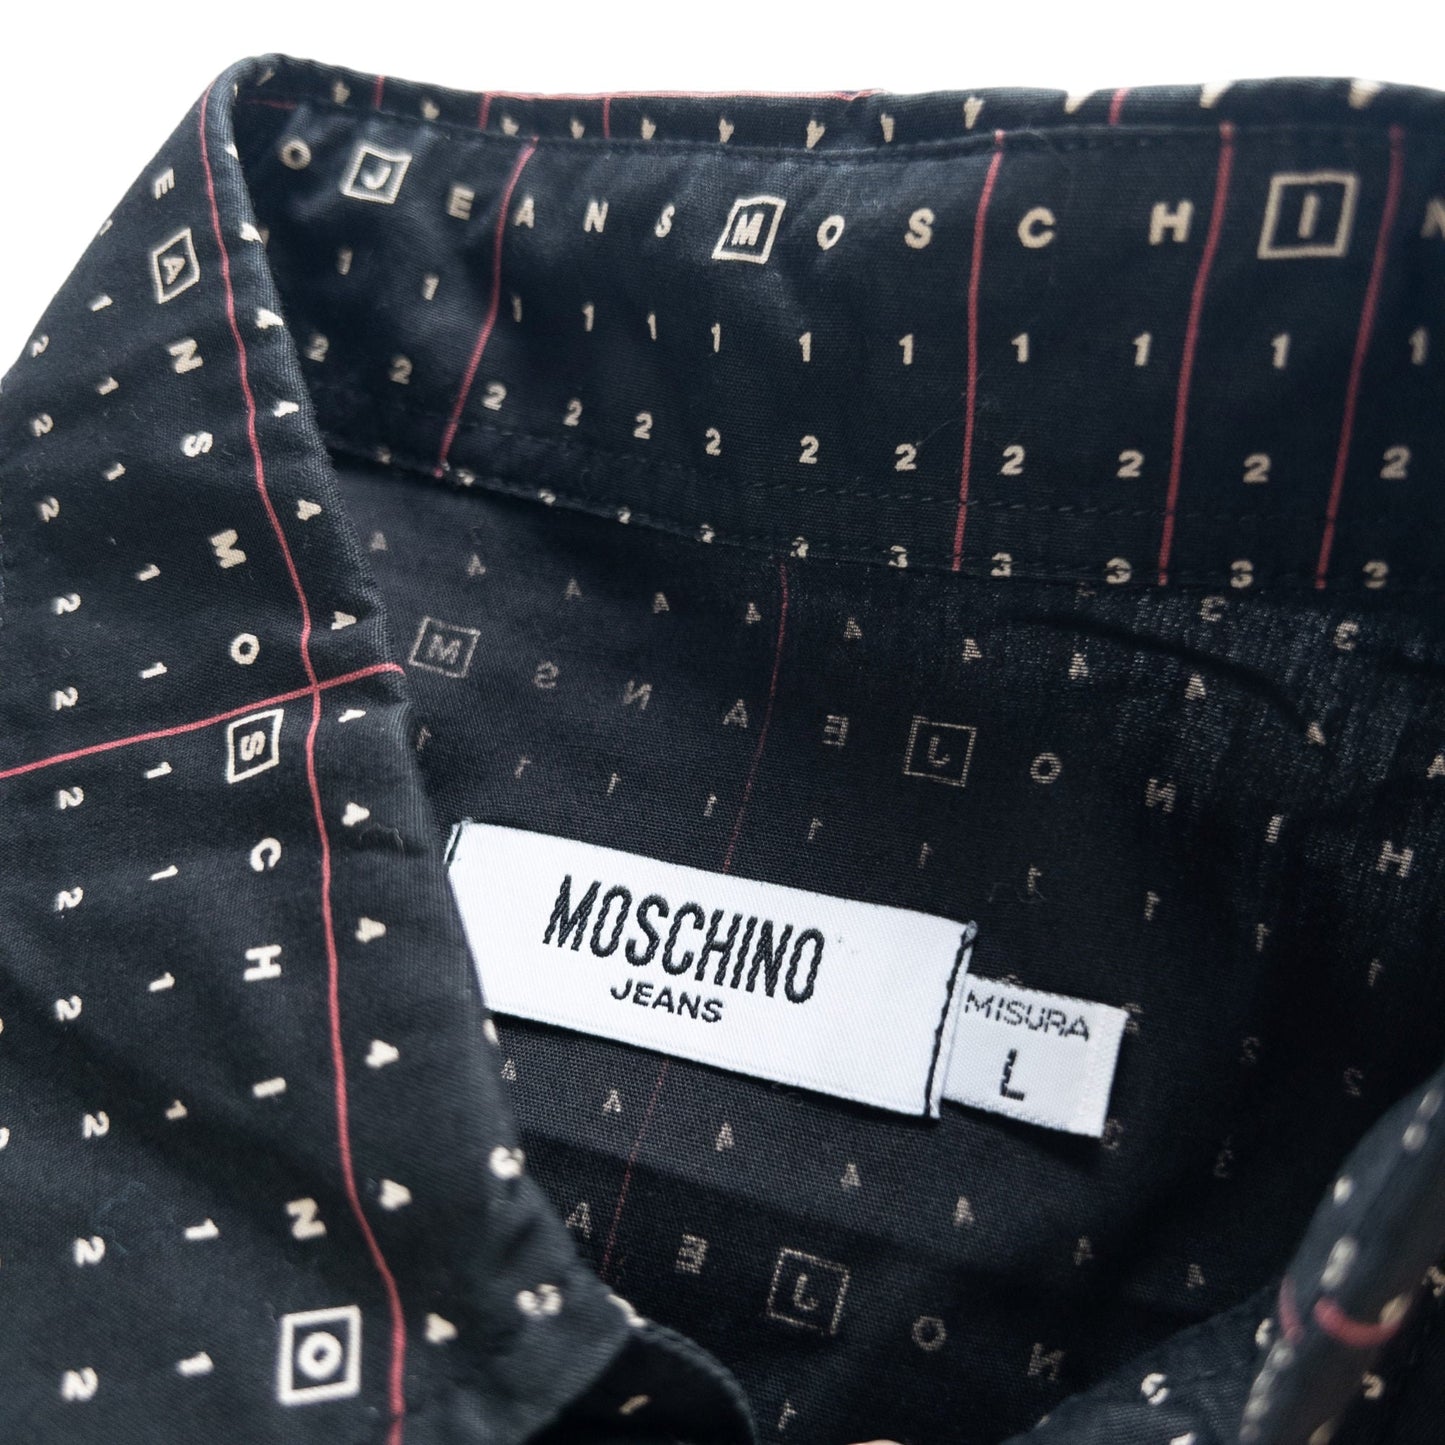 Vintage Moschino Jeans Button Up Shirt Size M